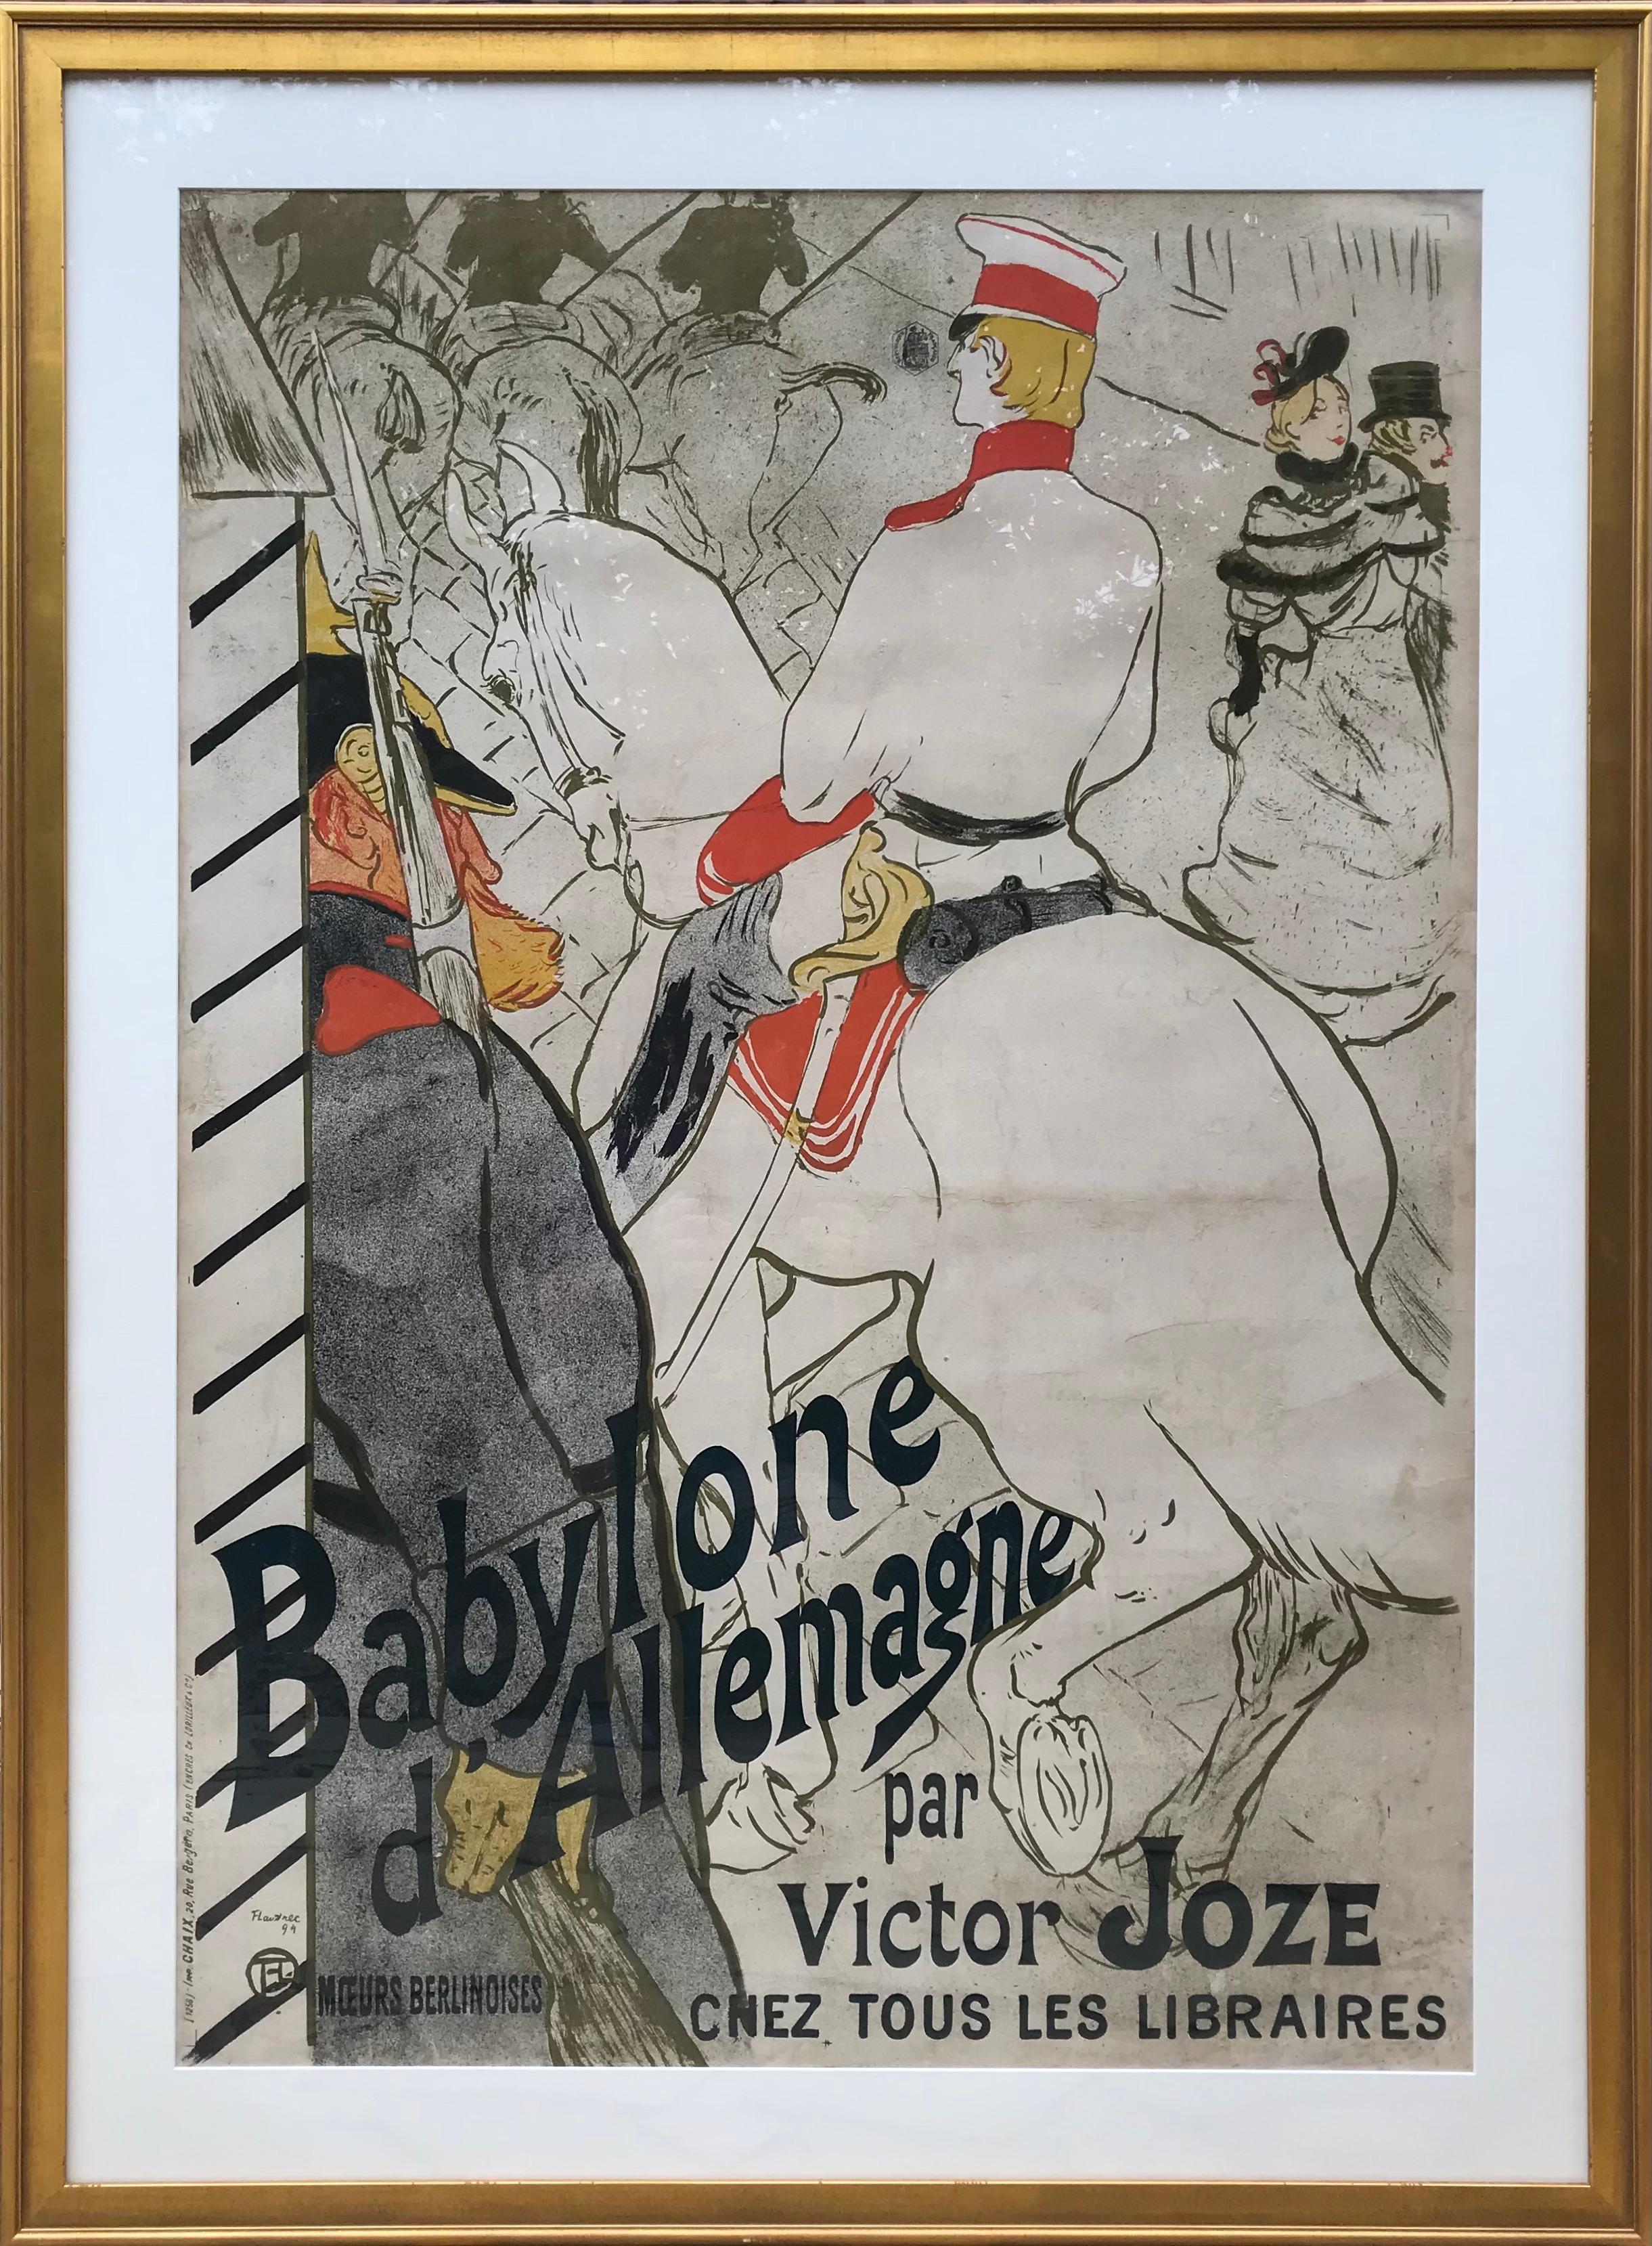 Henri De Toulouse-Lautrec (French 1864 - 1901)
BABYLONE D'ALLEMAGNE Printed in 1894

Lithograph printed in colors, 1894, on linen-backed wove paper, printed by Chaix, Paris, tastefully framed with archival materials.

Condition: Linen lined. Wear